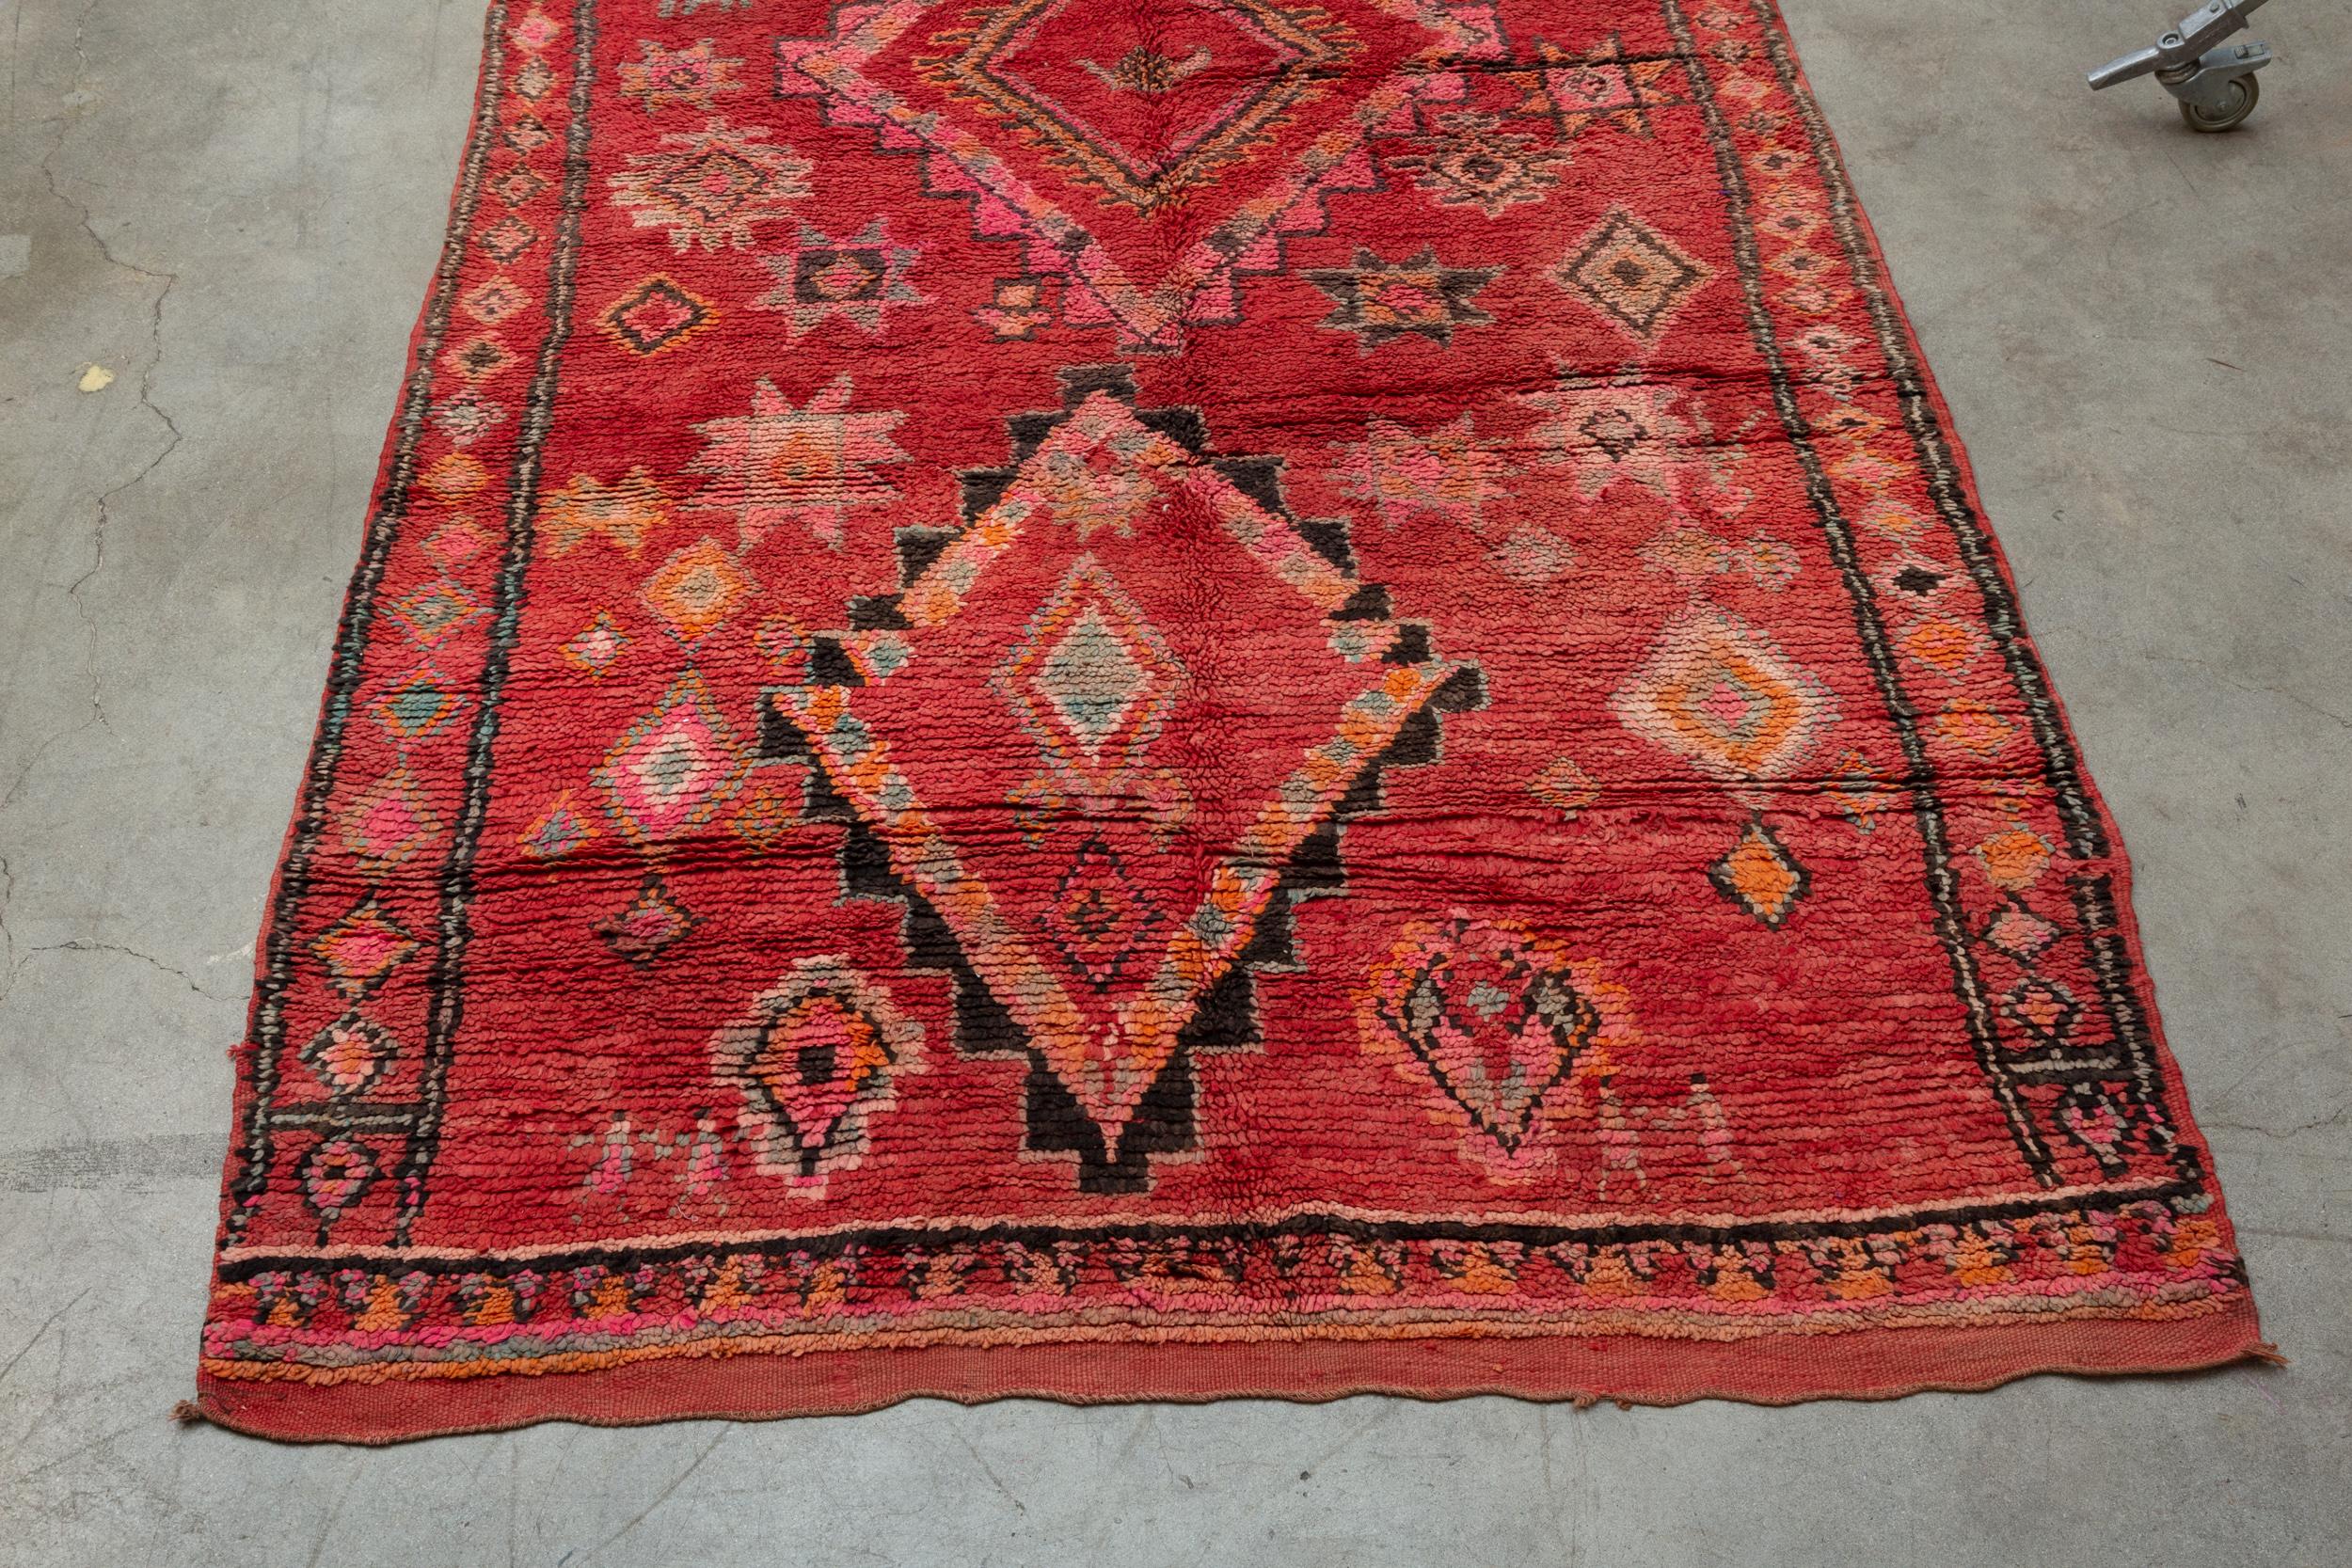 Boujad is a large widespread area and not a tribe. Since they are woven by a number of tribes so they can display varying techniques and styles. Originating in the Middle Atlas region of Morocco, Boujad rugs are low-pile soft wool and known for